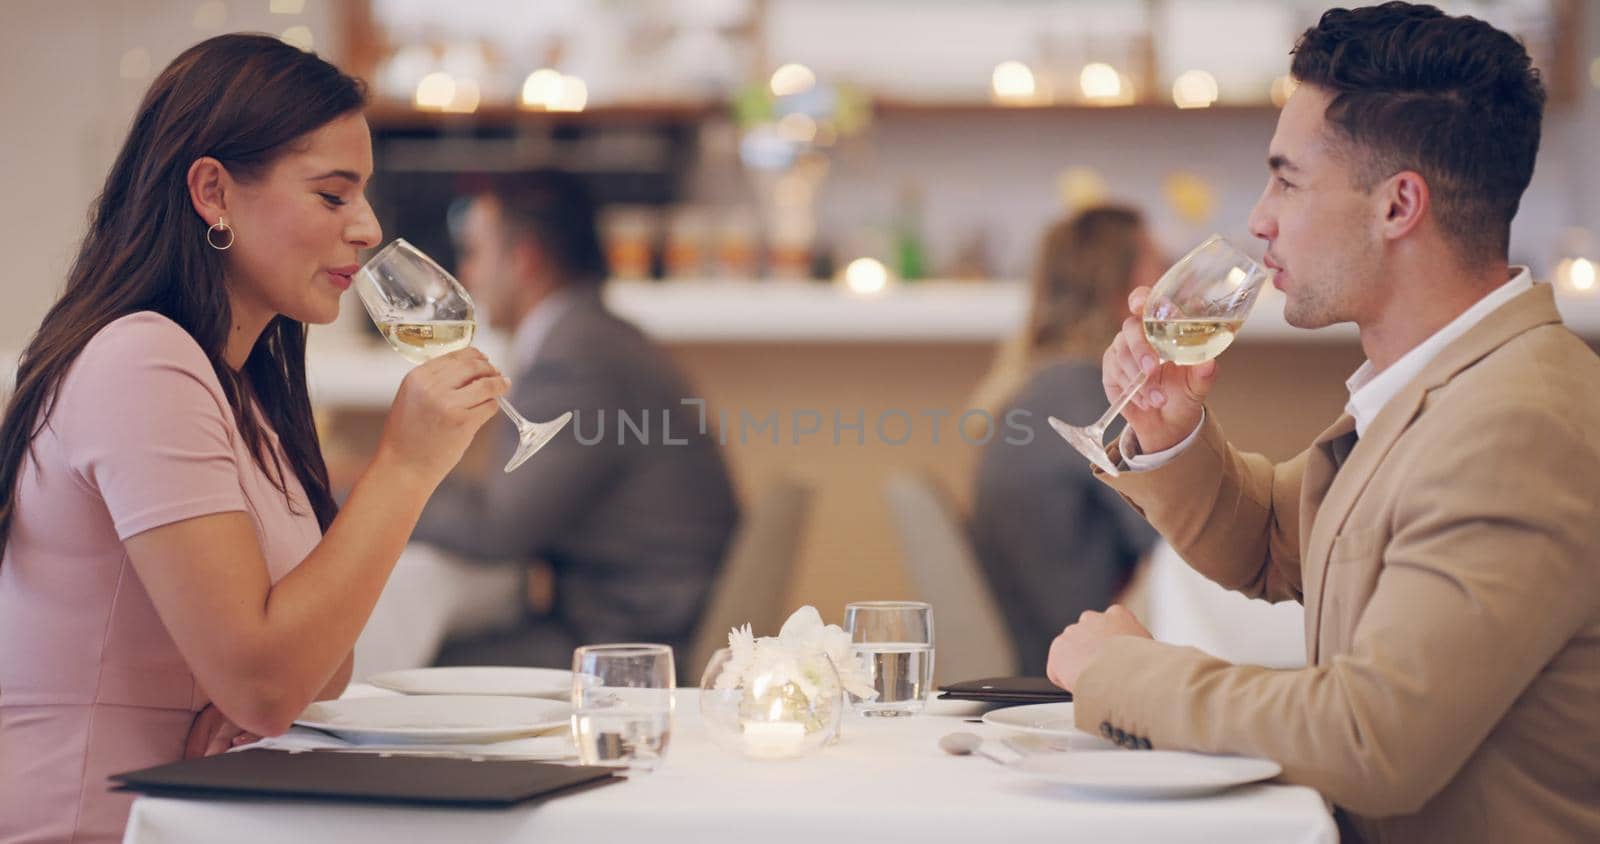 4k video footage of a couple making a toast while on a date at a restaurant